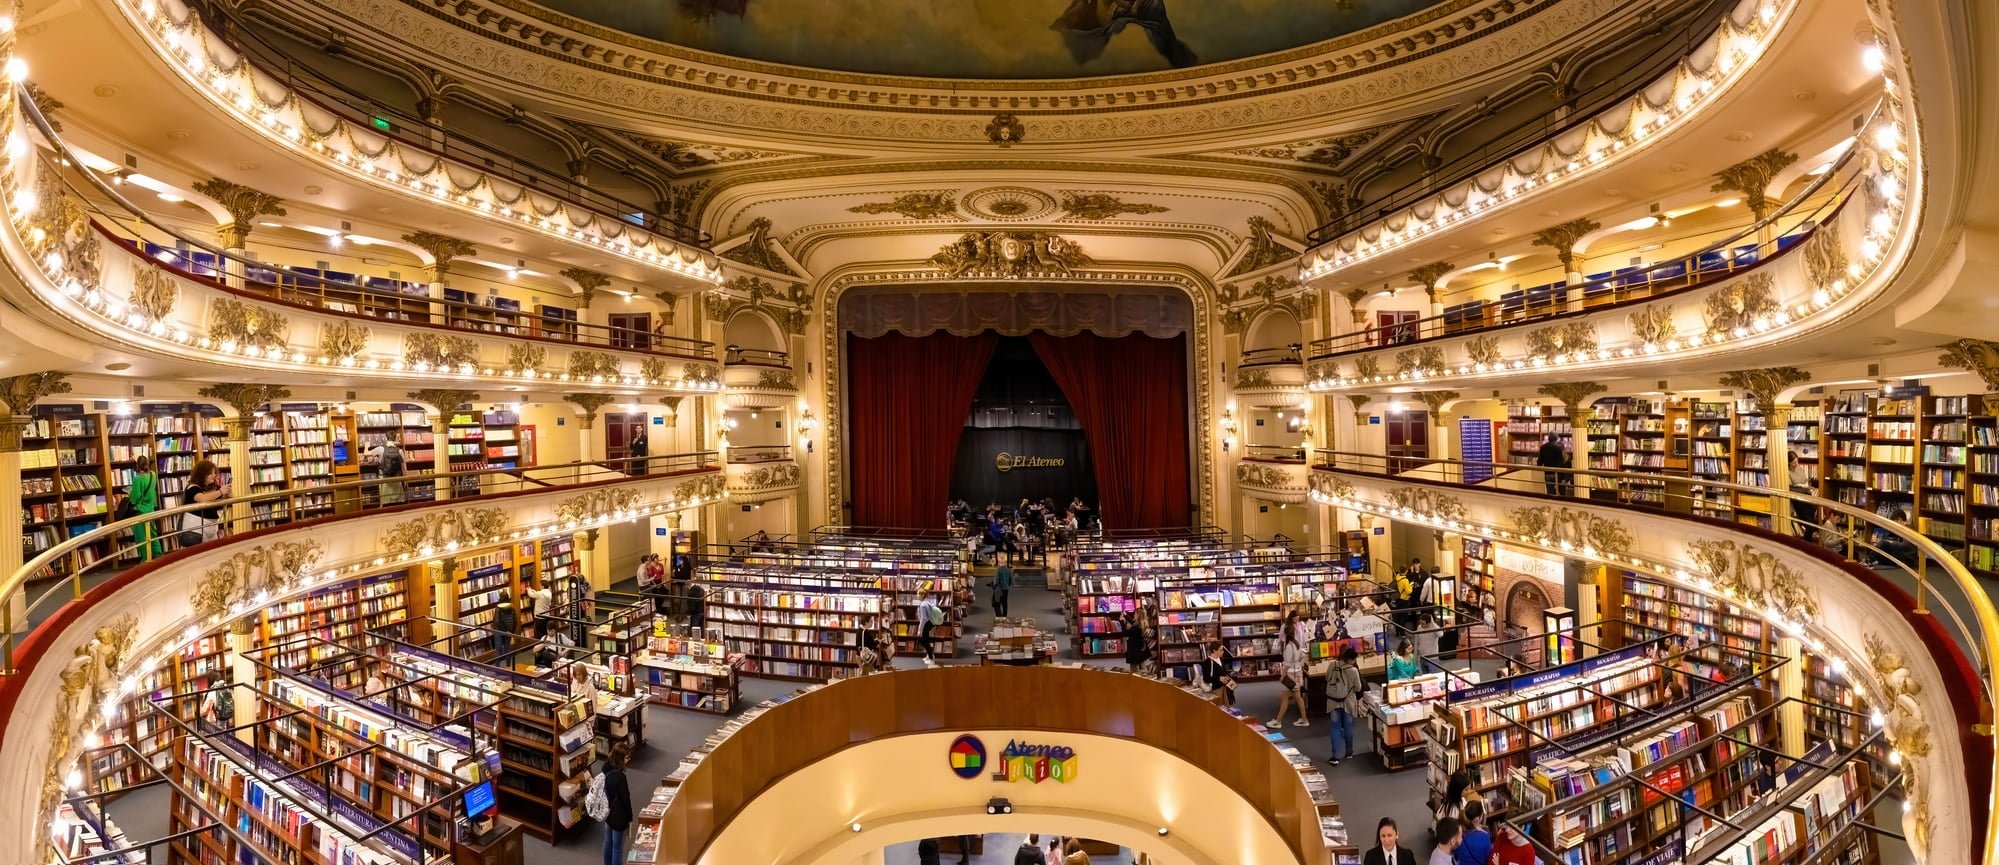 Buenos Aires El Ateneo Grand Splendid, named the most beautiful bookstore in the world and second largest